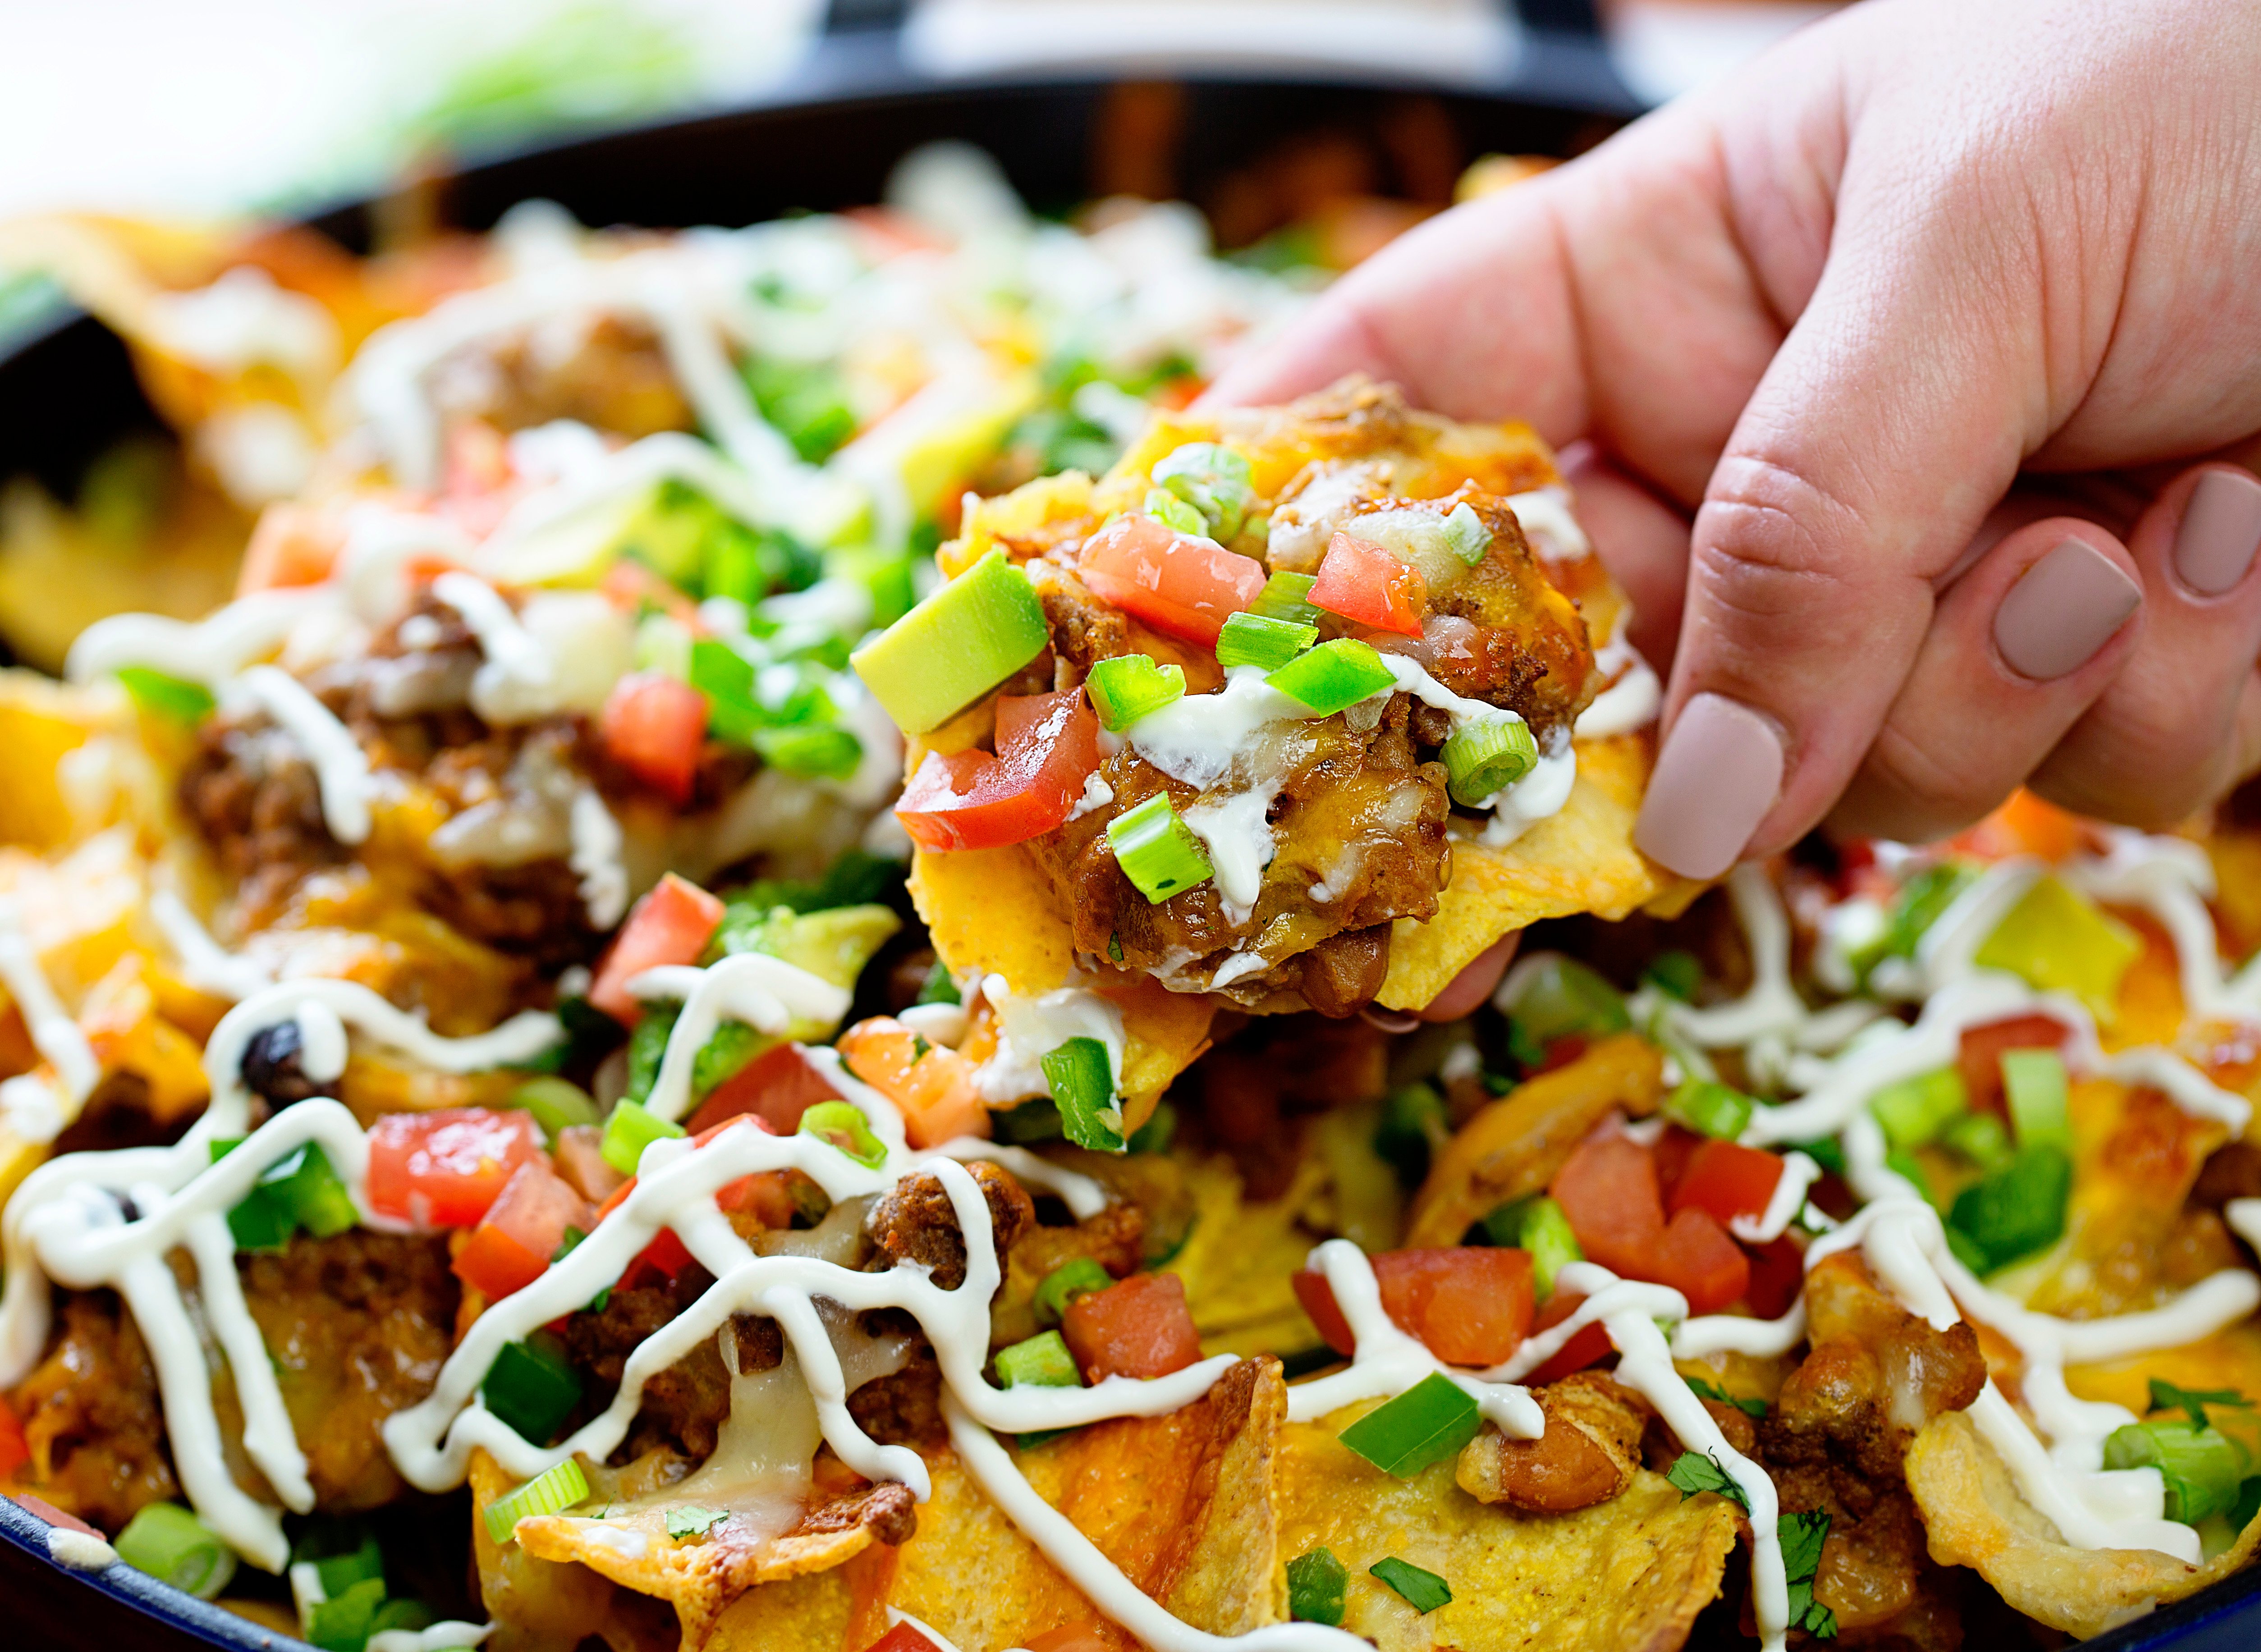 How to Make Nachos in a Skillet